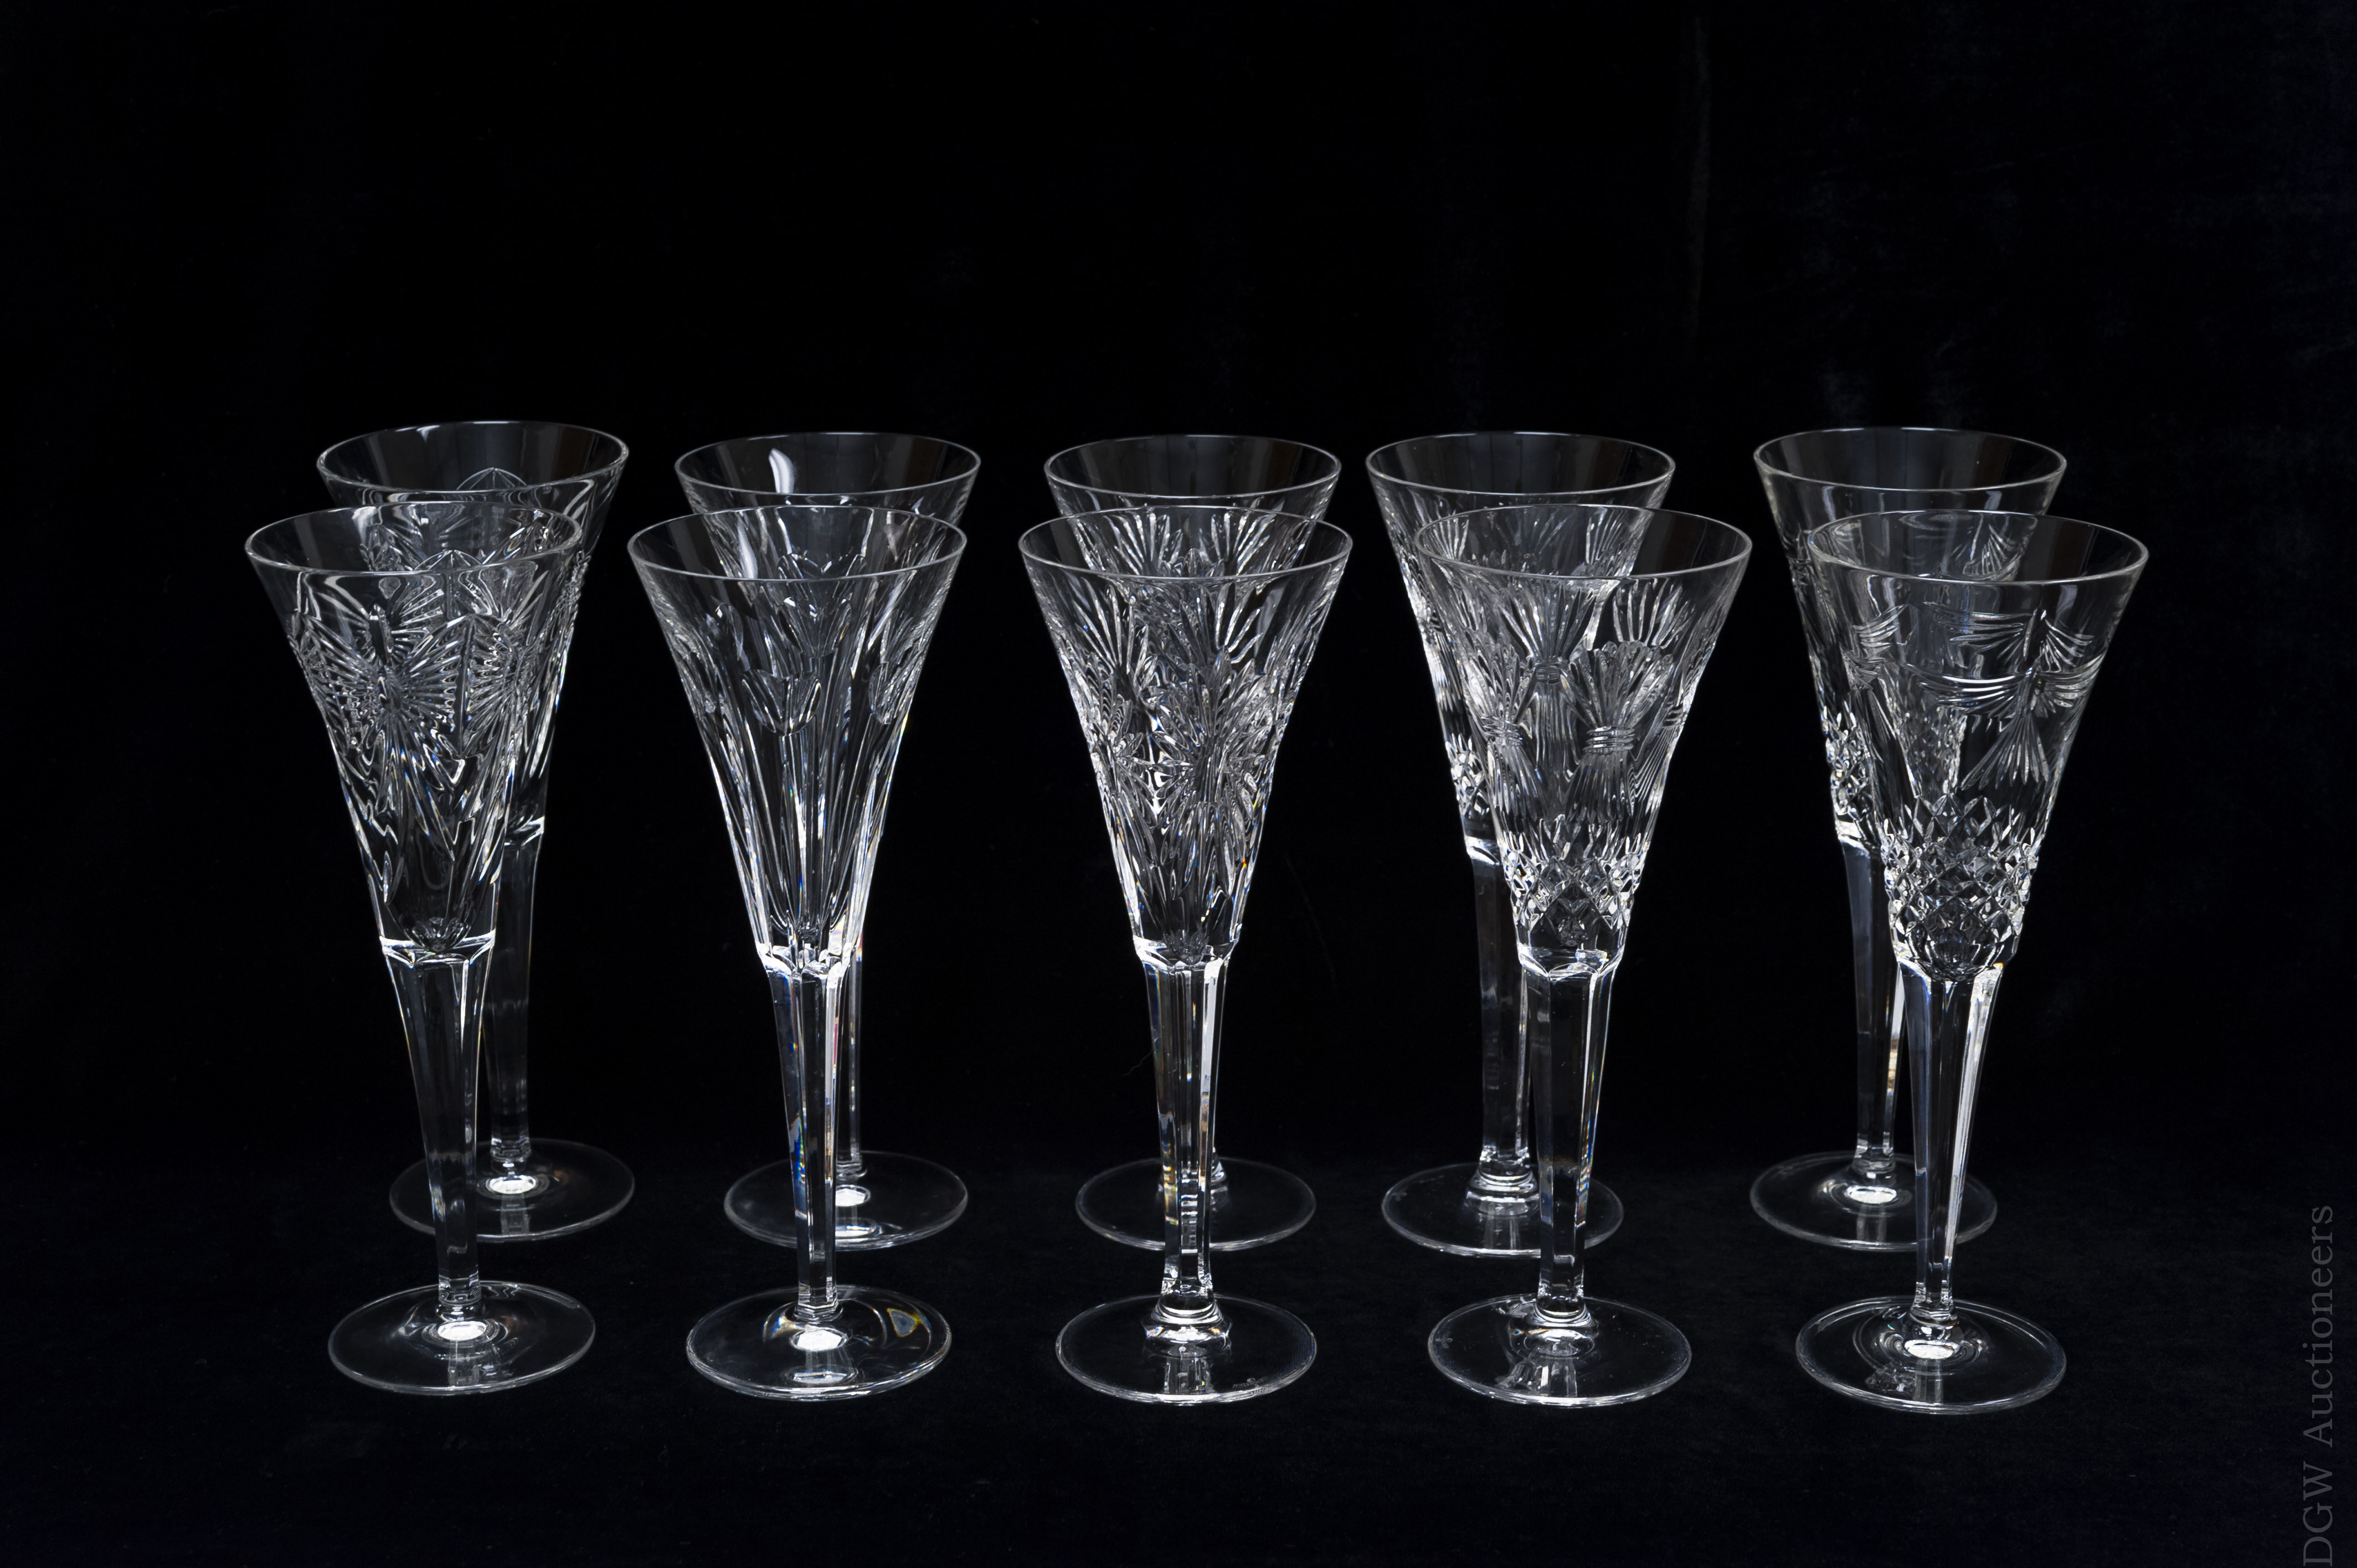 Waterford Crystal "The Millennium Collection".